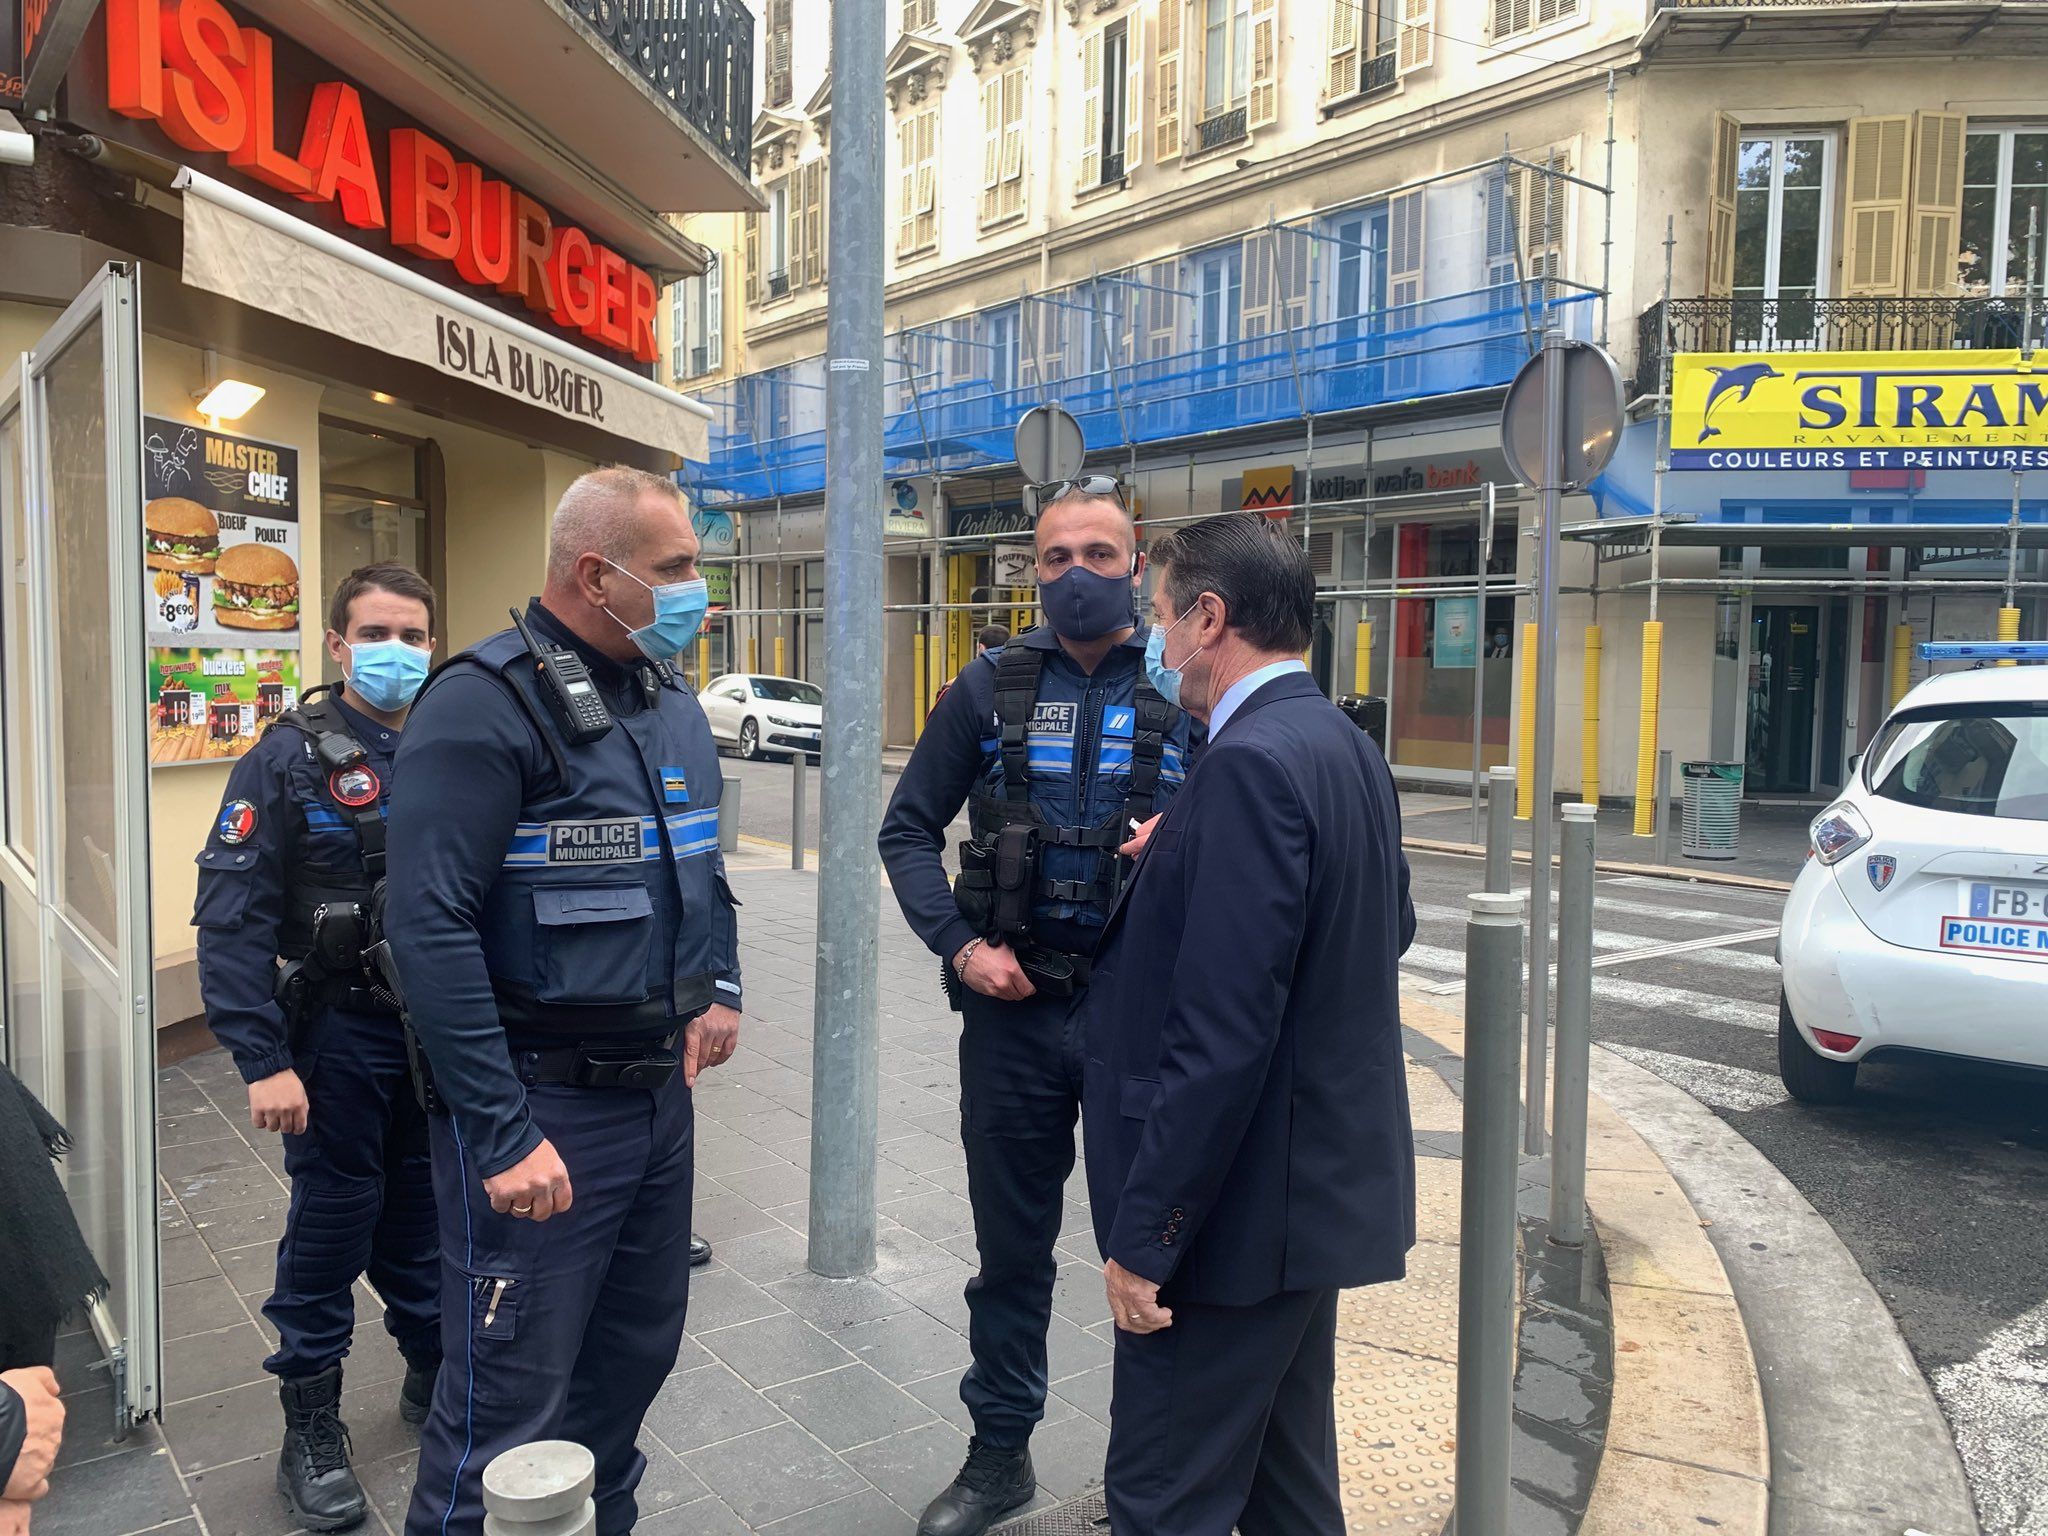 3 killed in knife attack in French city Nice, terror probe launched